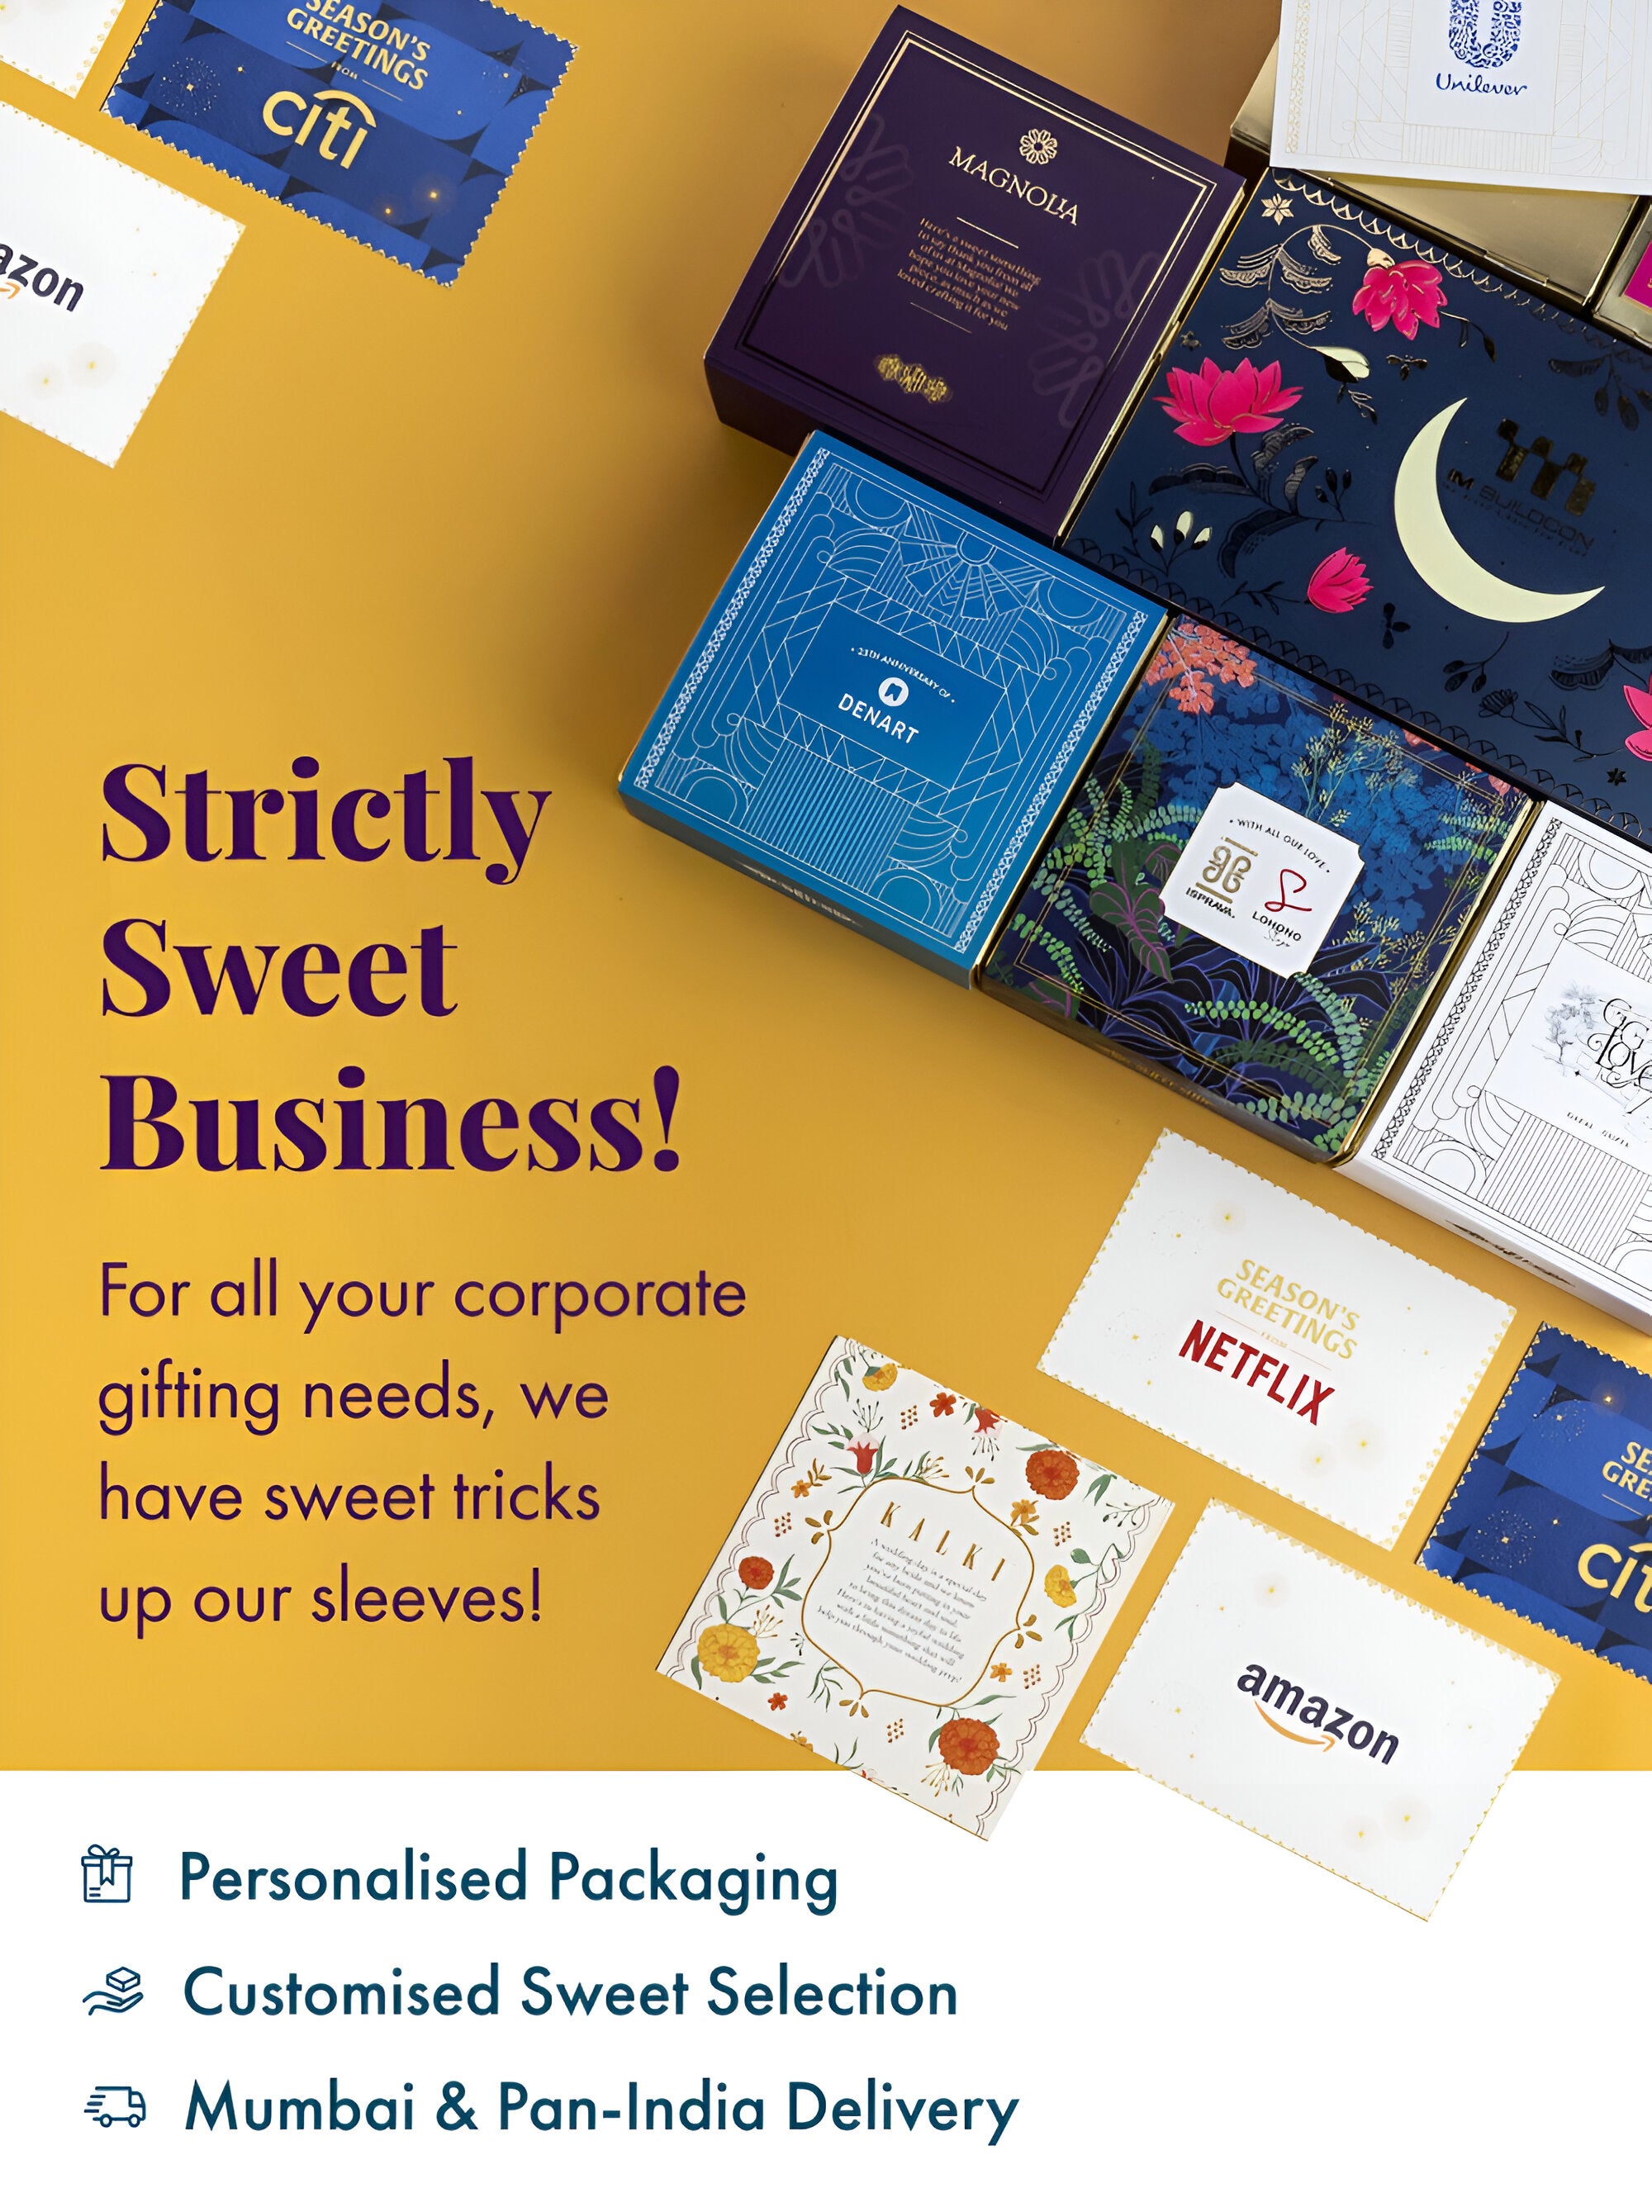 An April Fool's Prank, Led Me To Start My Corporate Gifting Company -